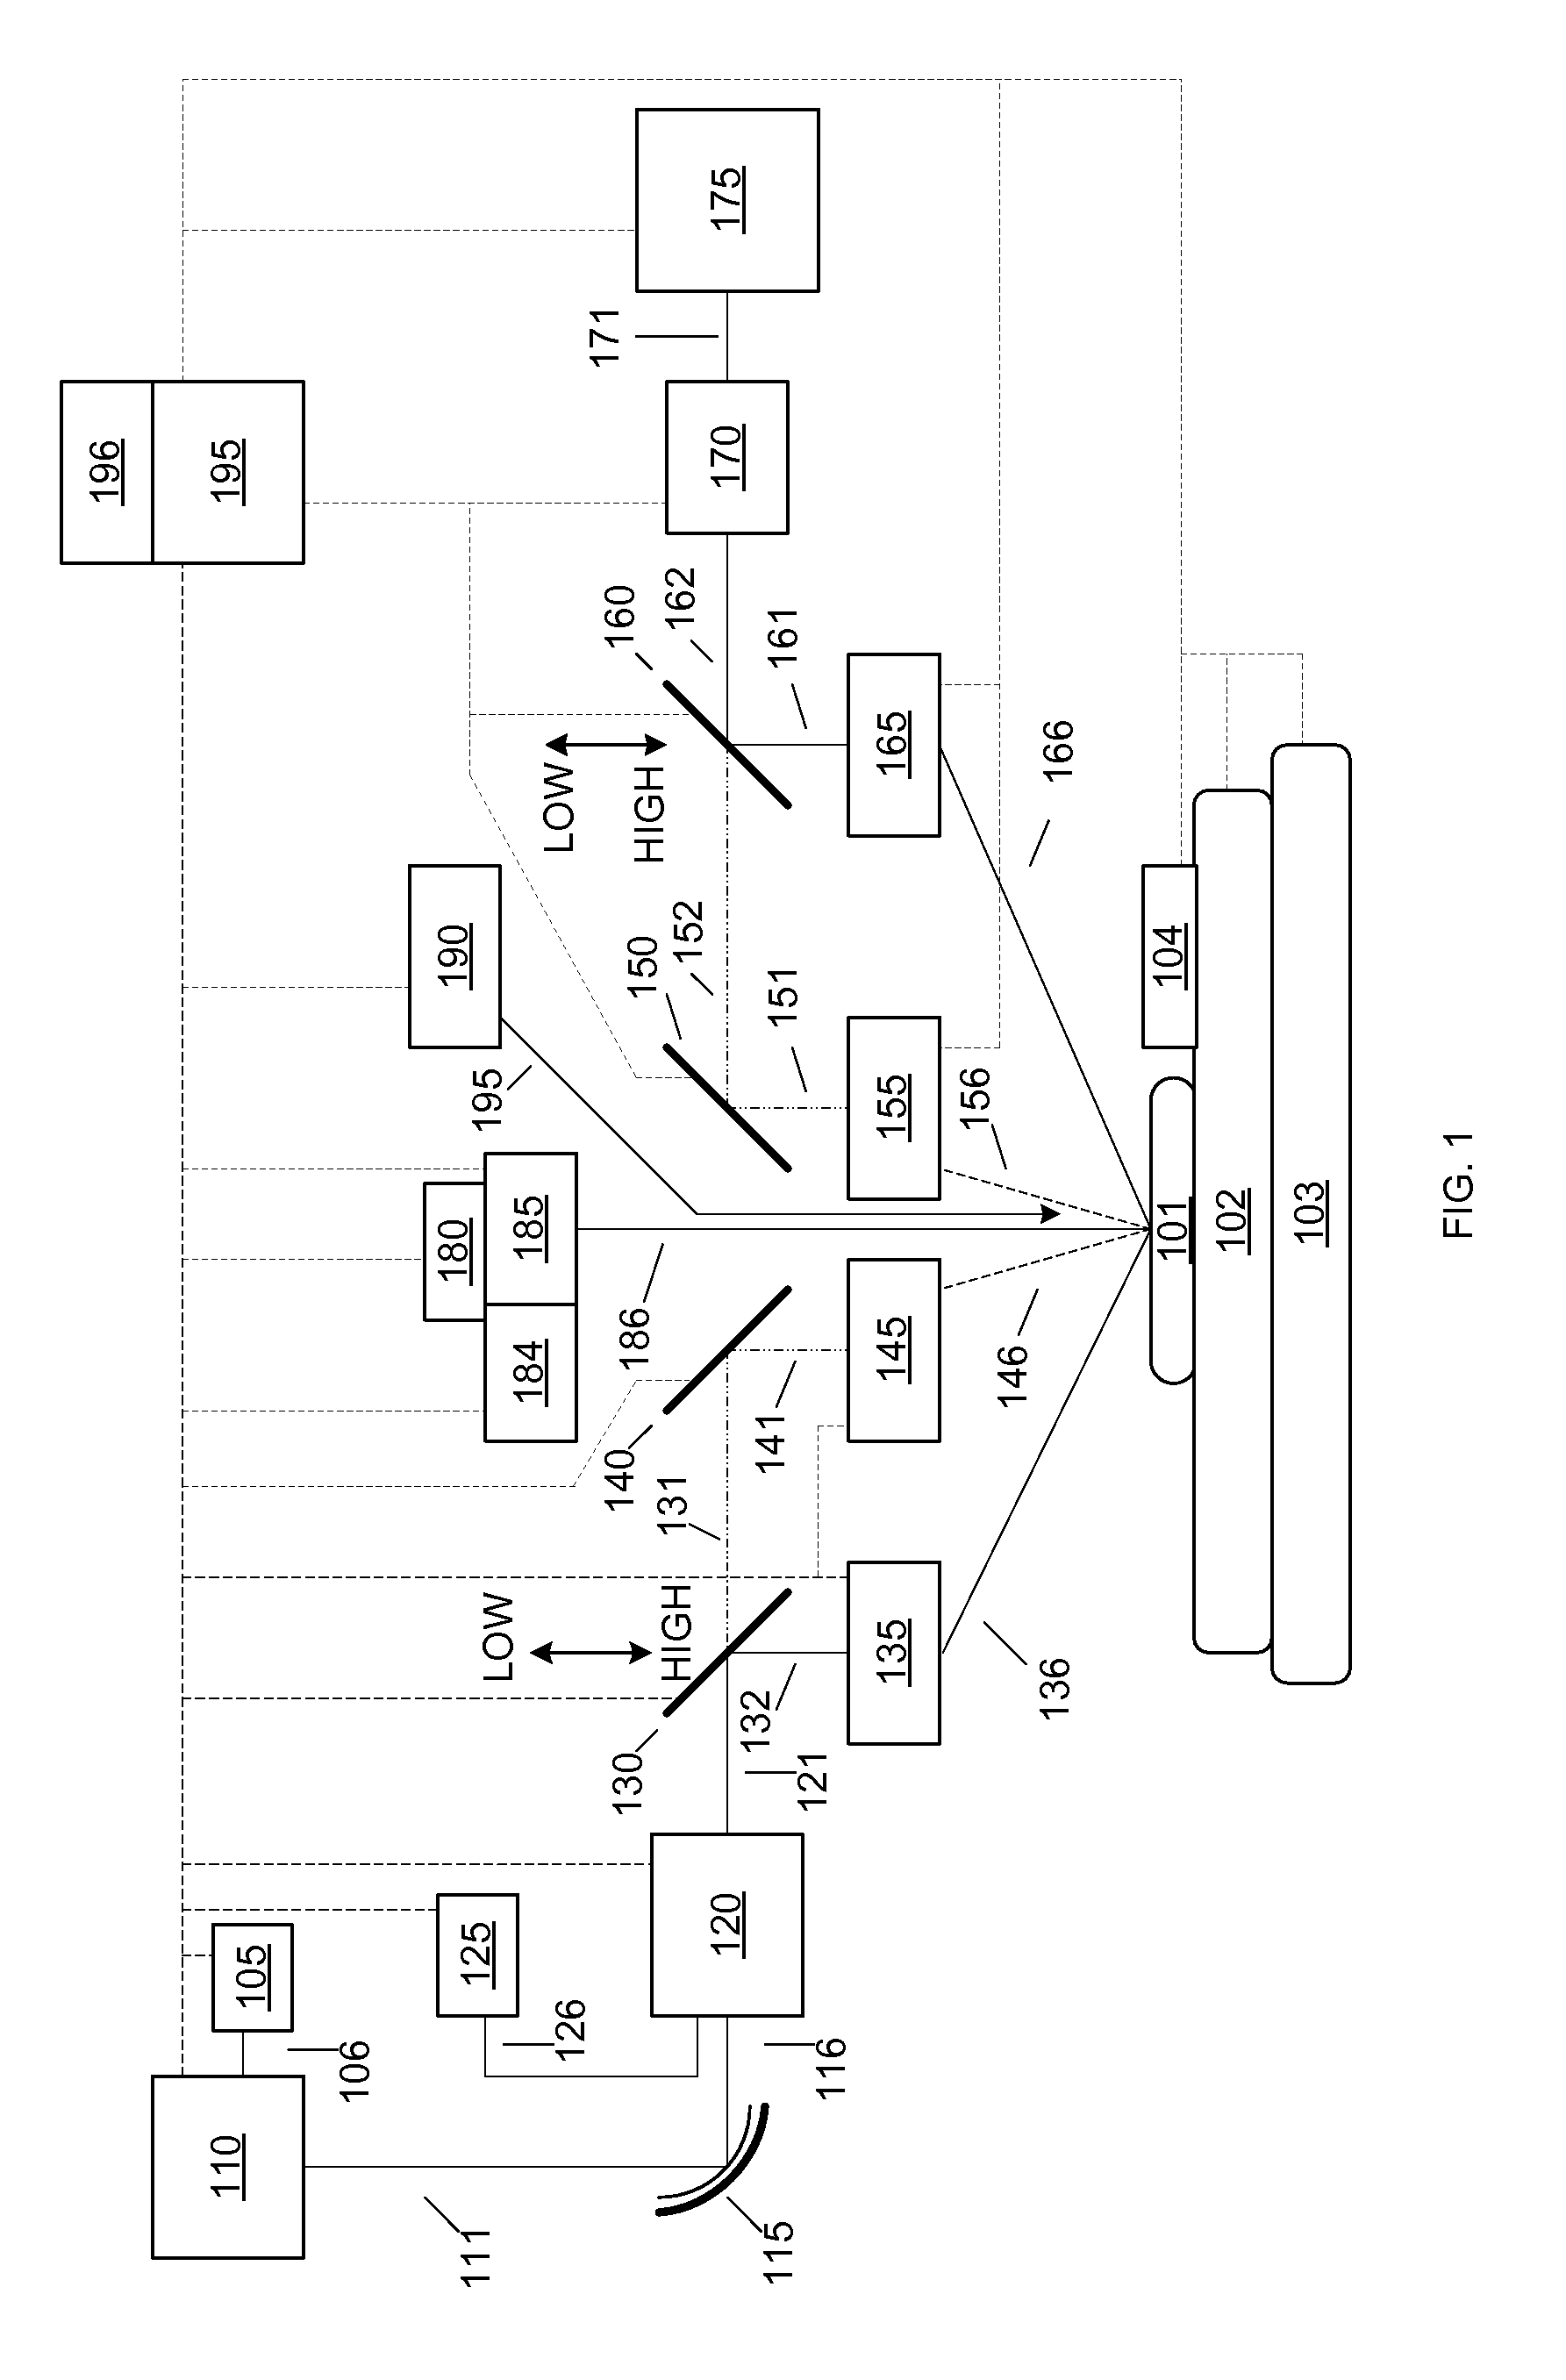 System and Method for Azimuth Angle Calibration